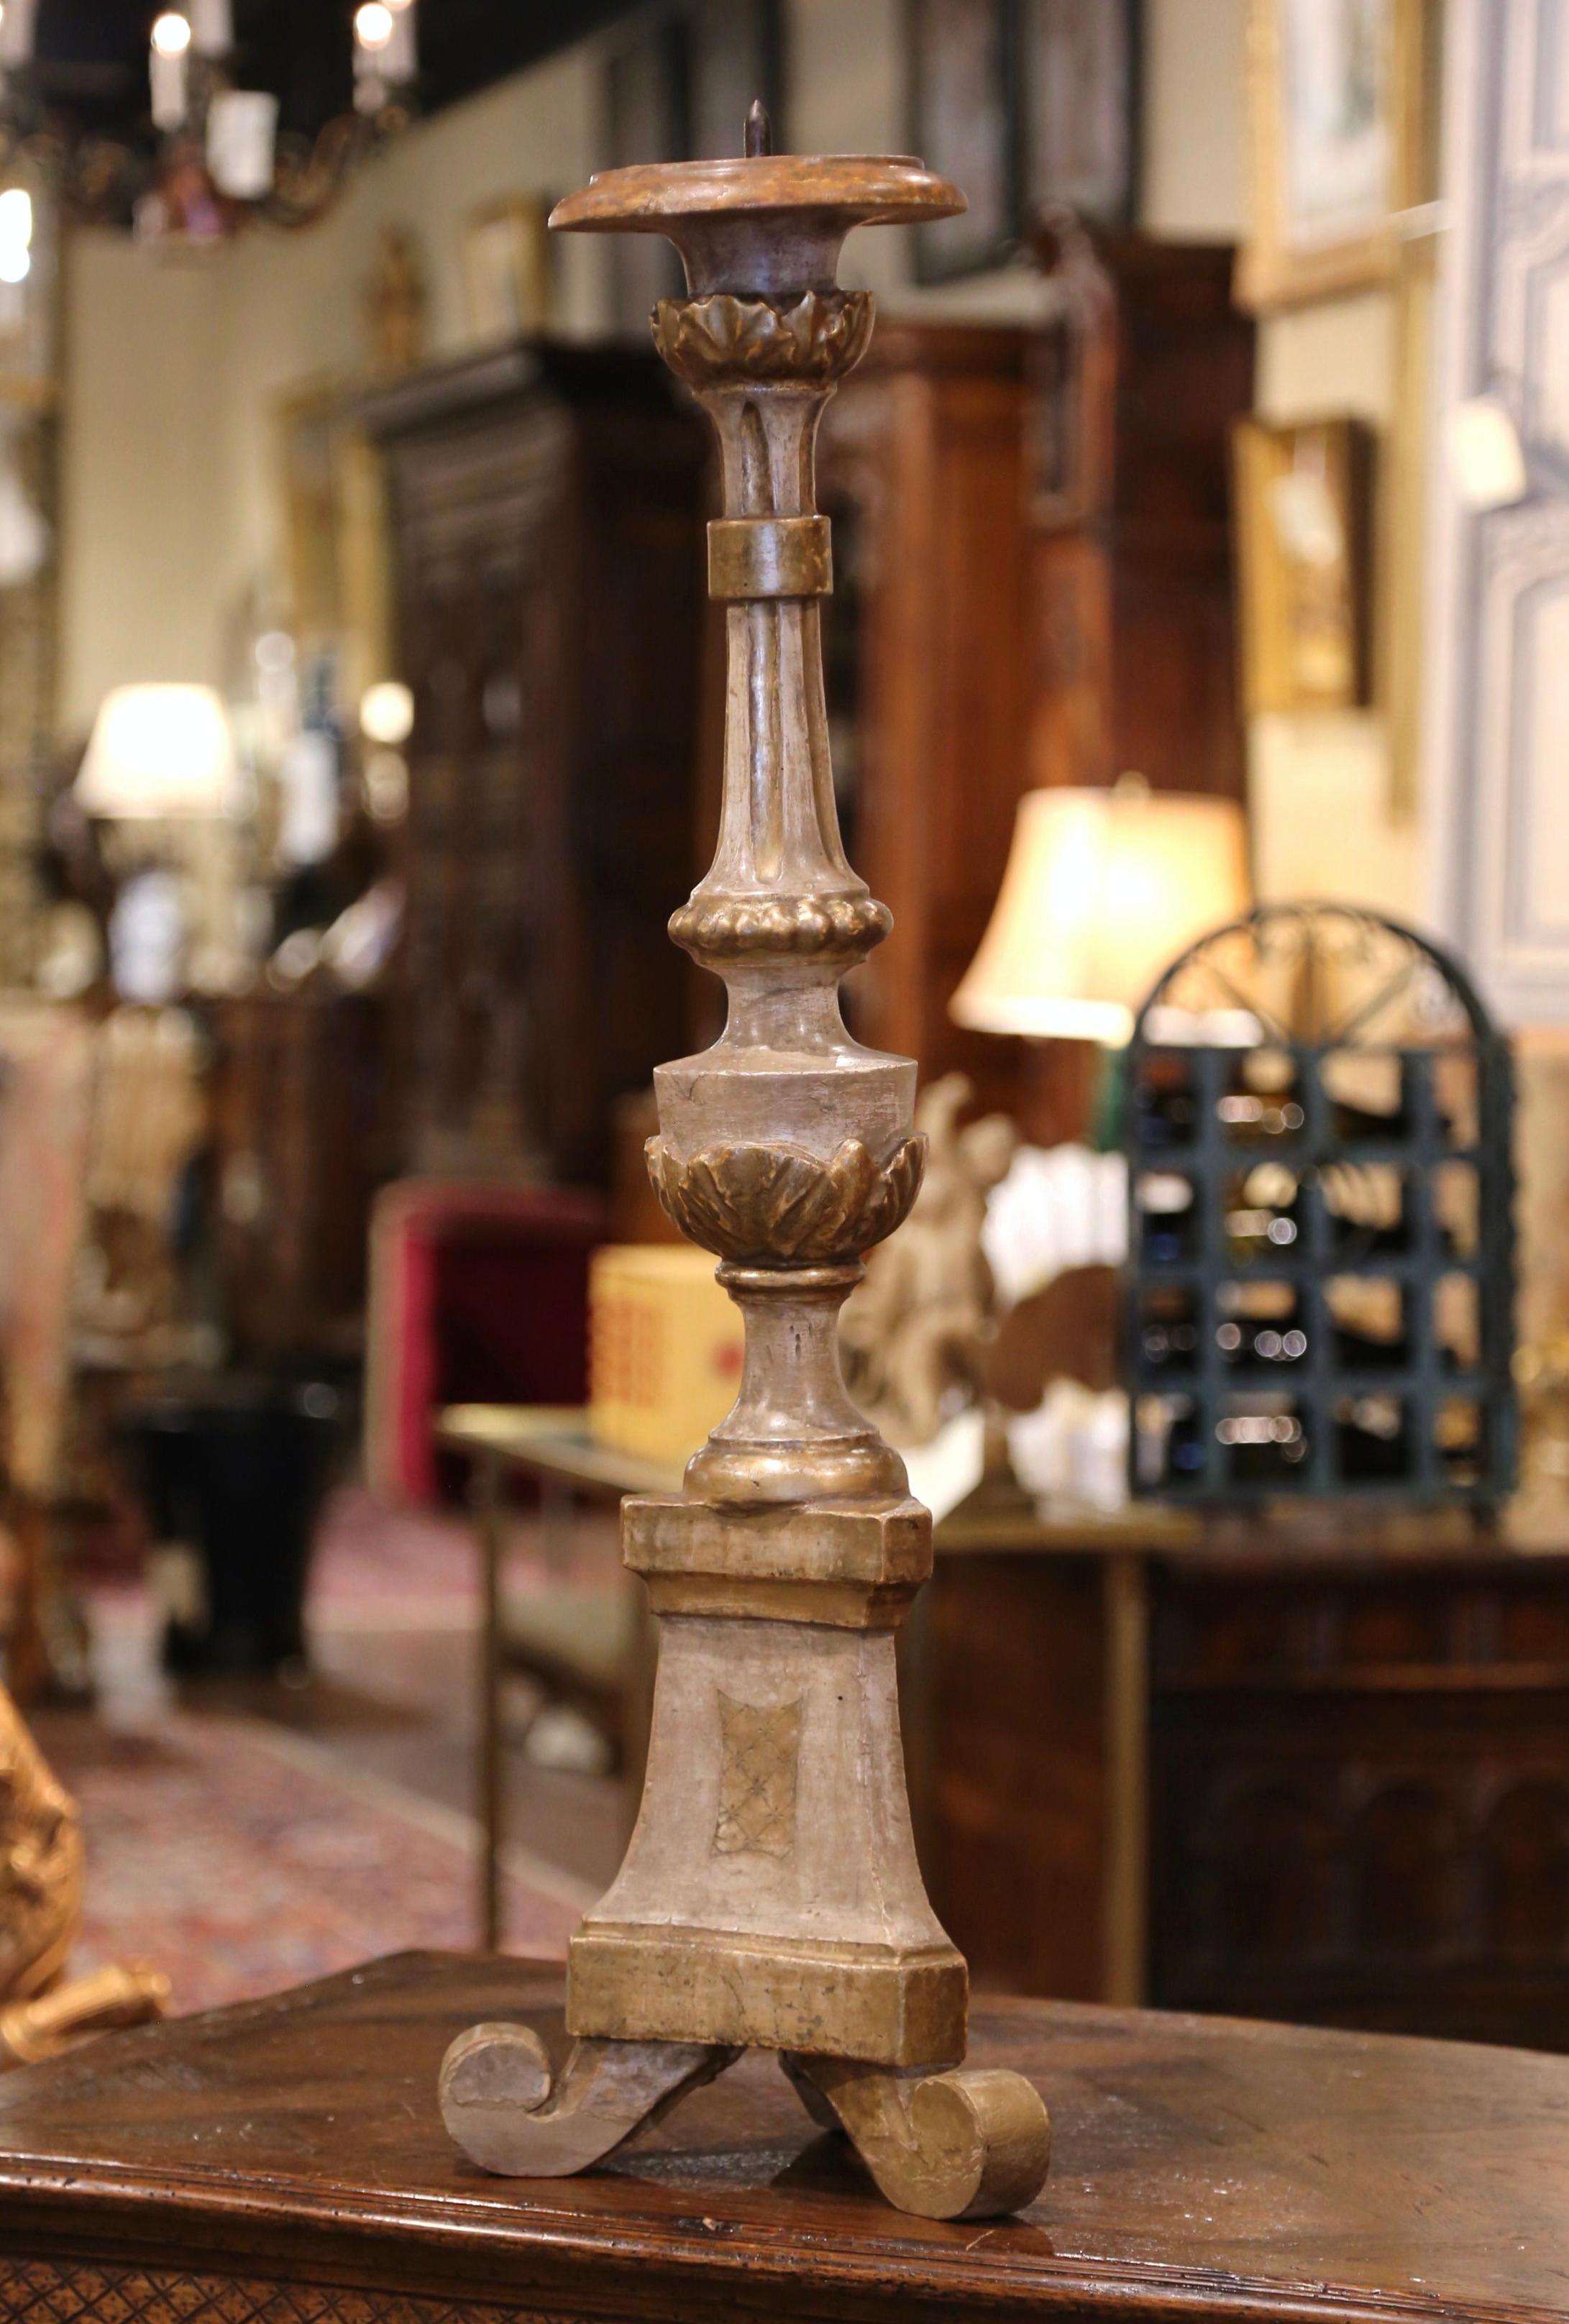 The tall antique candlestick was crafted in Italy, circa 1880. Standing on three scrolled feet over a triangle base, the pic cierge features a carved stem with acanthus leaf motifs and a metal pricket at the top to hold a candle. The candlestick is